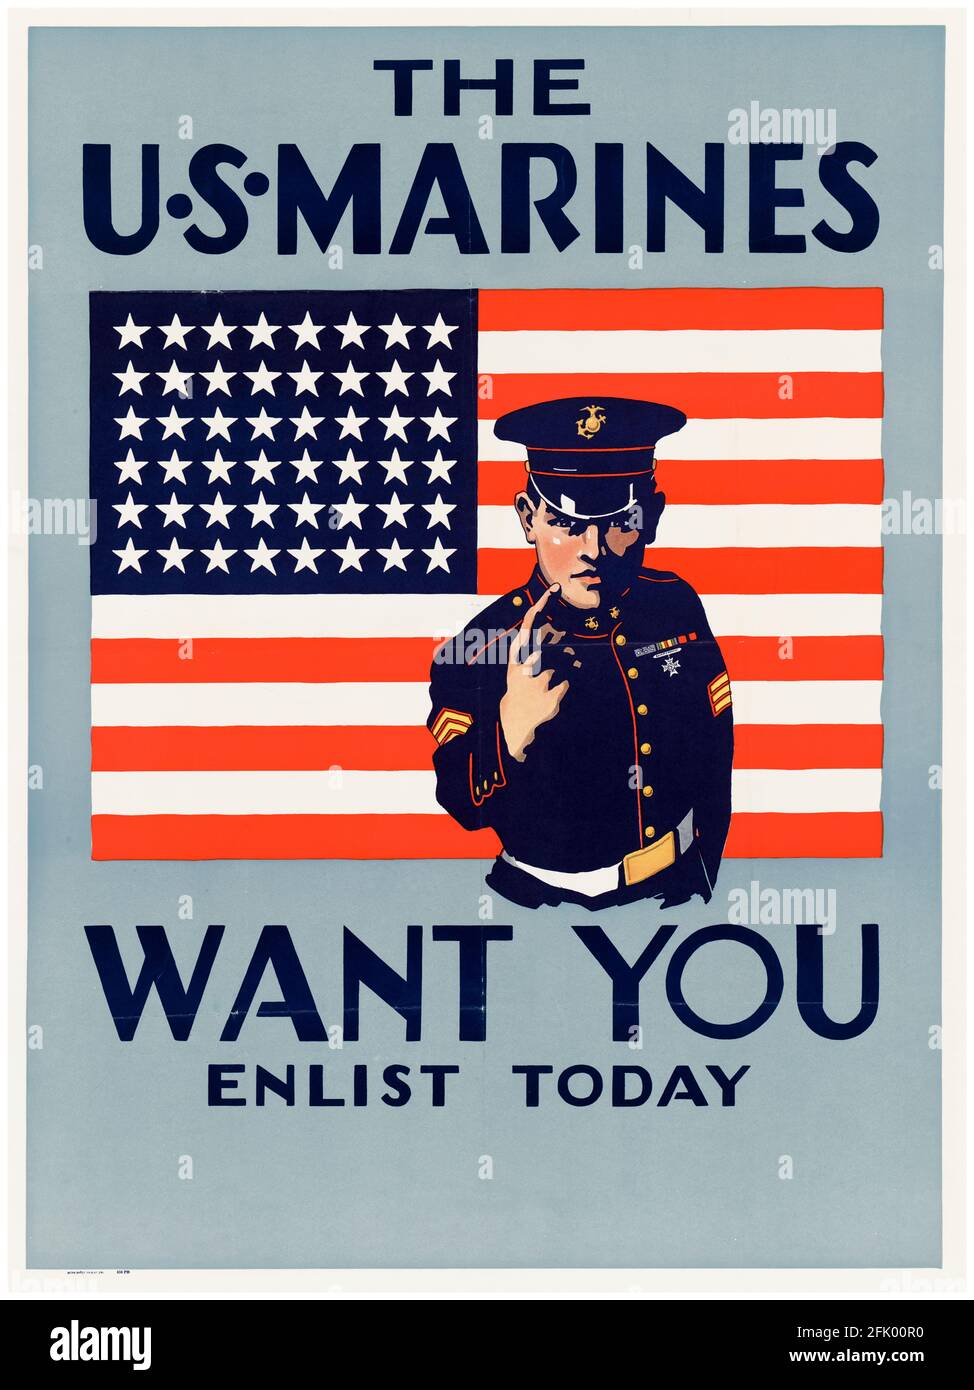 The US Marines Want YOU, Enlist Today: American, WW2 military recruitment poster, (USMC), 1942-1945 Stock Photo